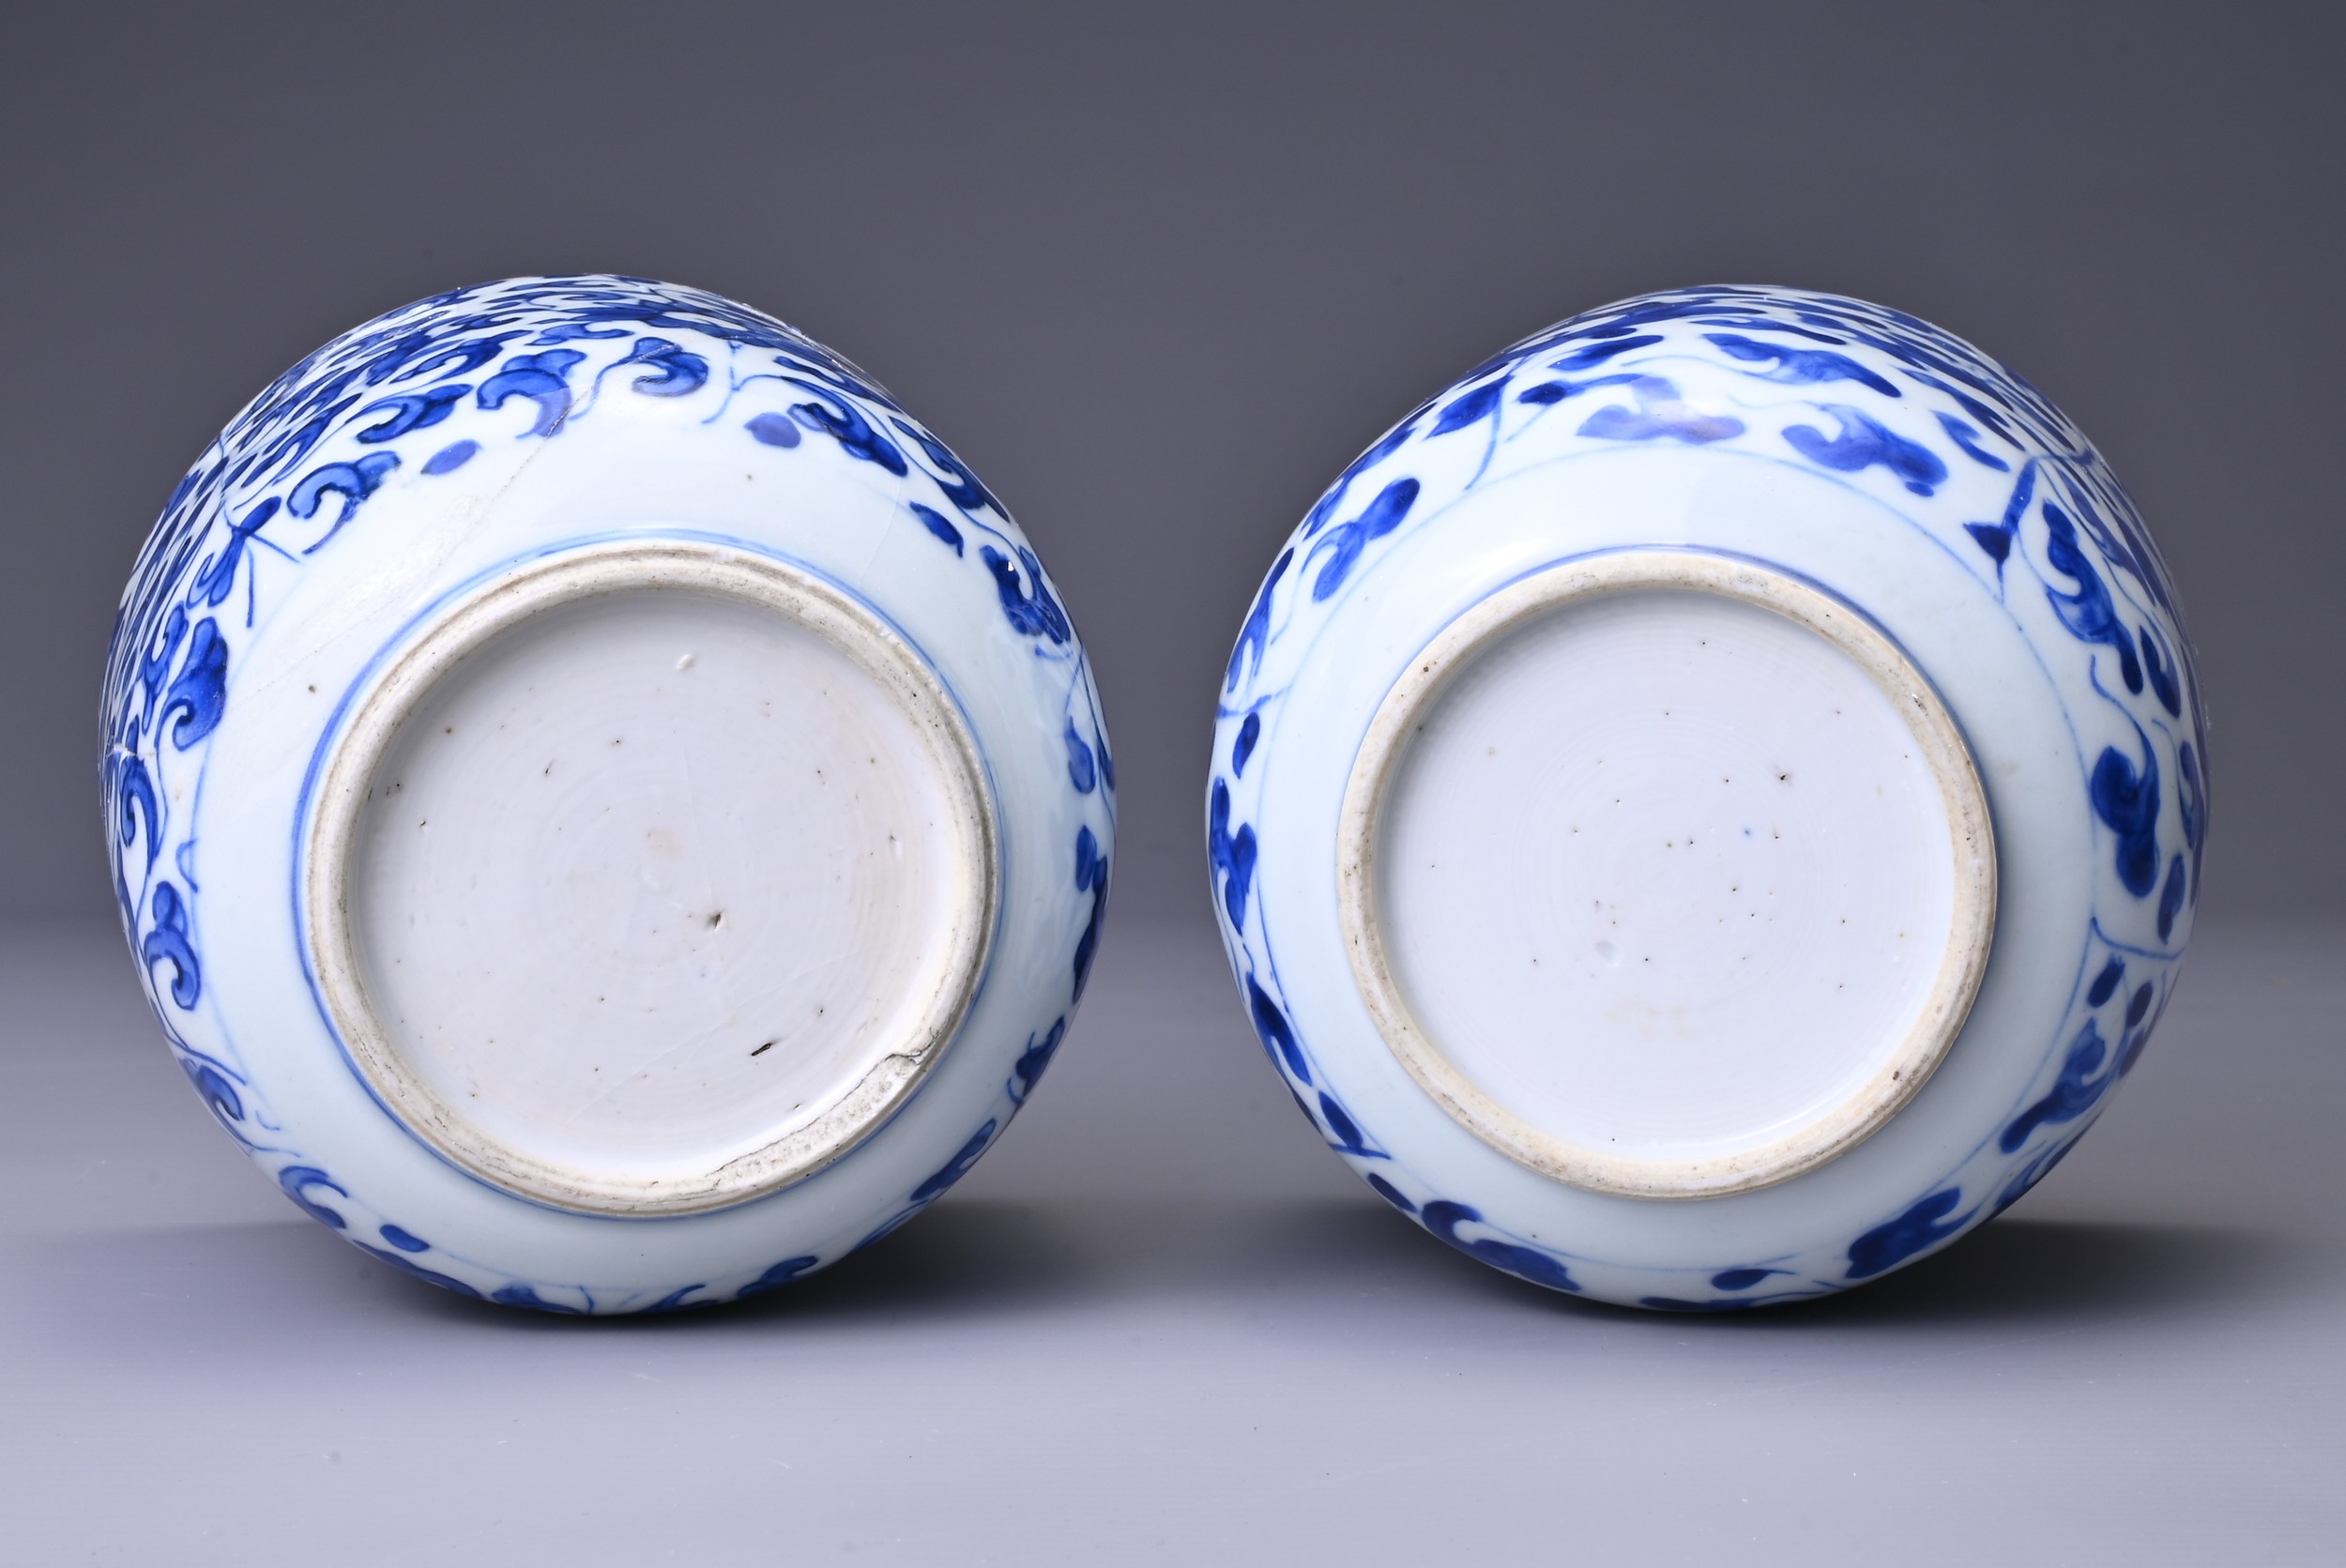 TWO CHINESE BLUE AND WHITE PORCELAIN JARS, 18TH CENTURY. Each with continuous floral scroll - Image 4 of 6